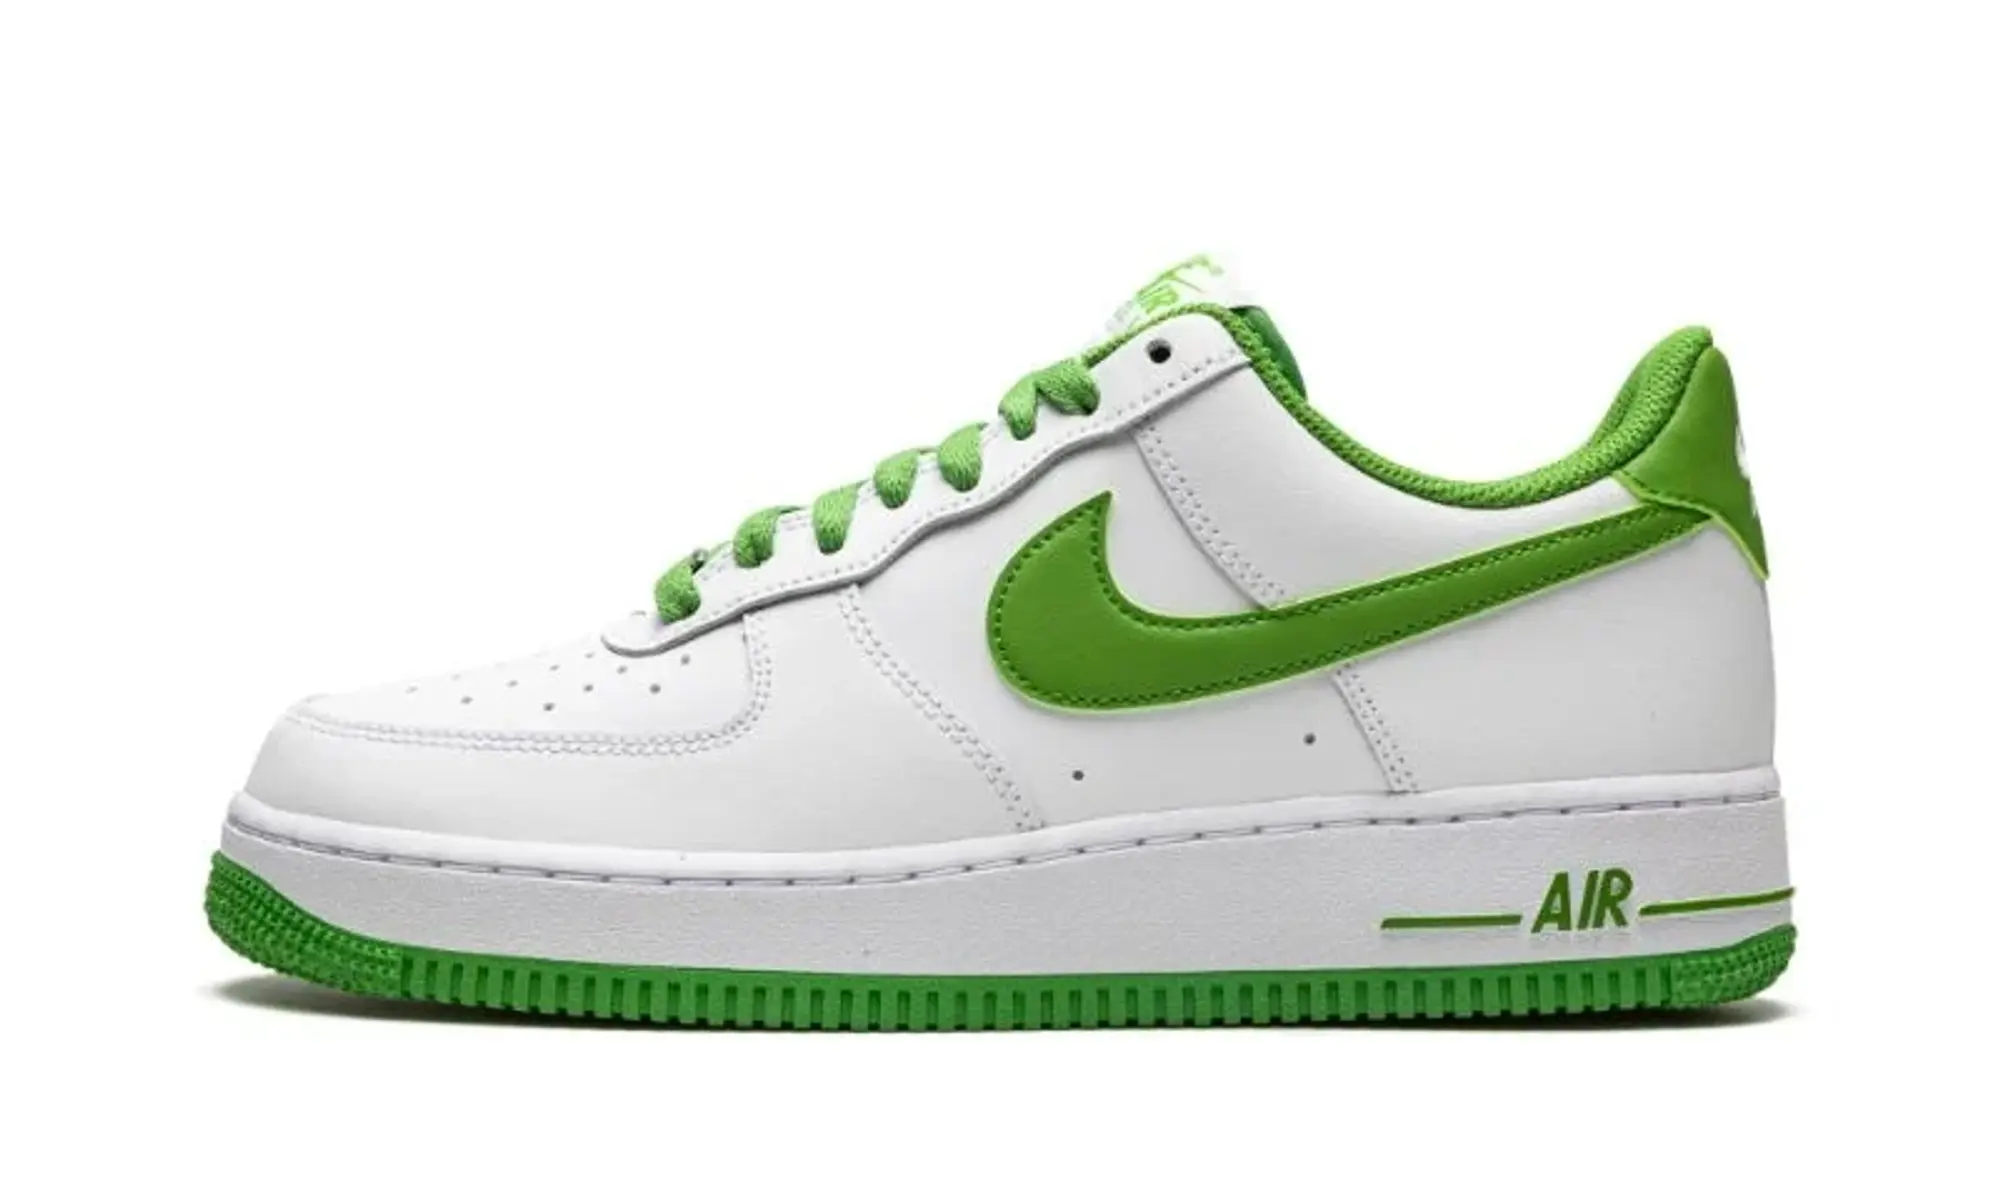 Nike Air Force 1 '07 Chlorophyll Shoes